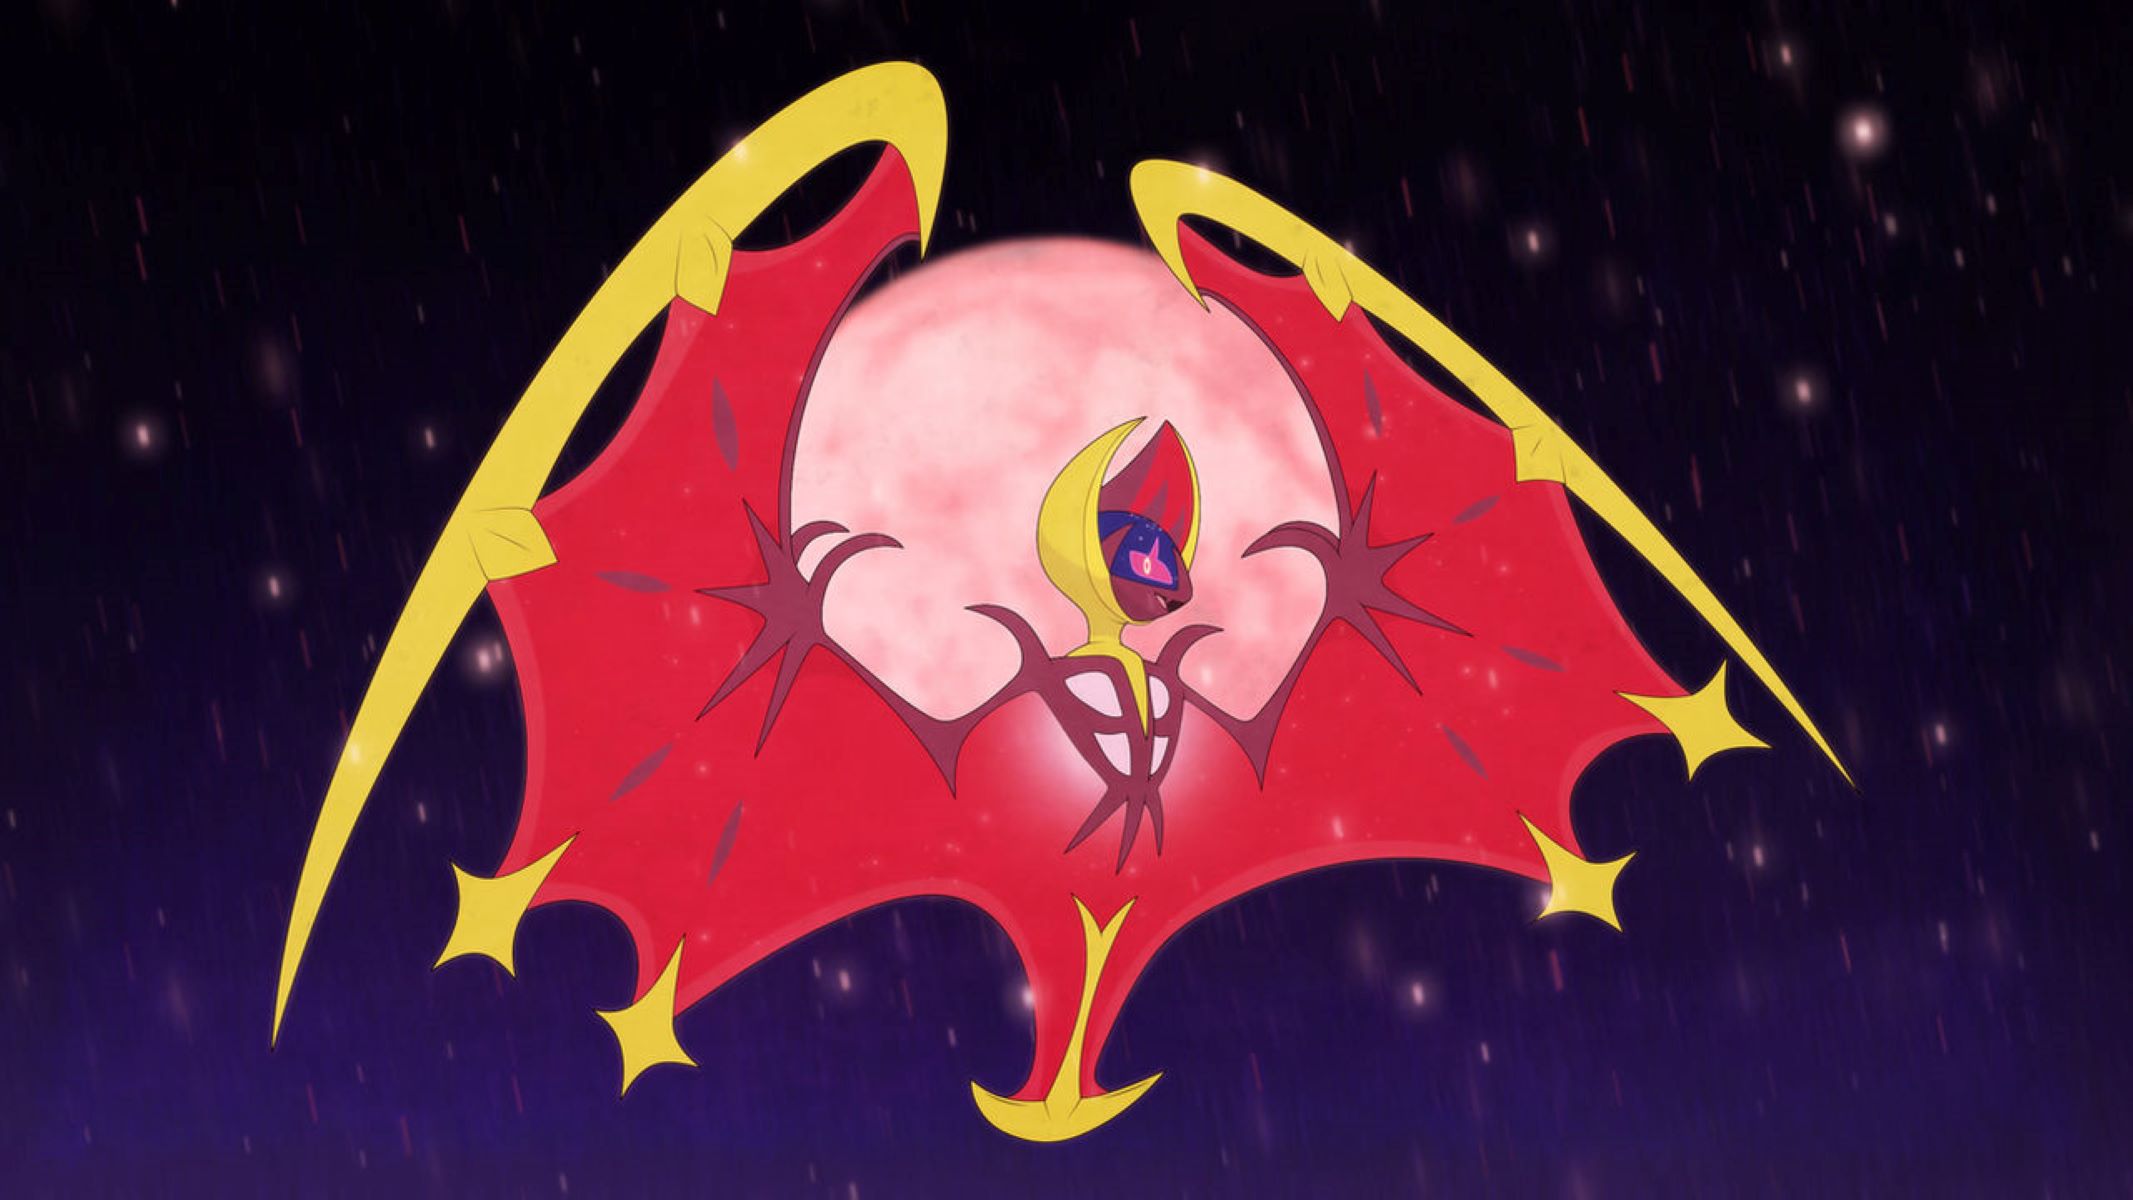 Unleash The Power Of A Shiny Lunala In Pokemon Sun Or Moon With These Epic Tips!